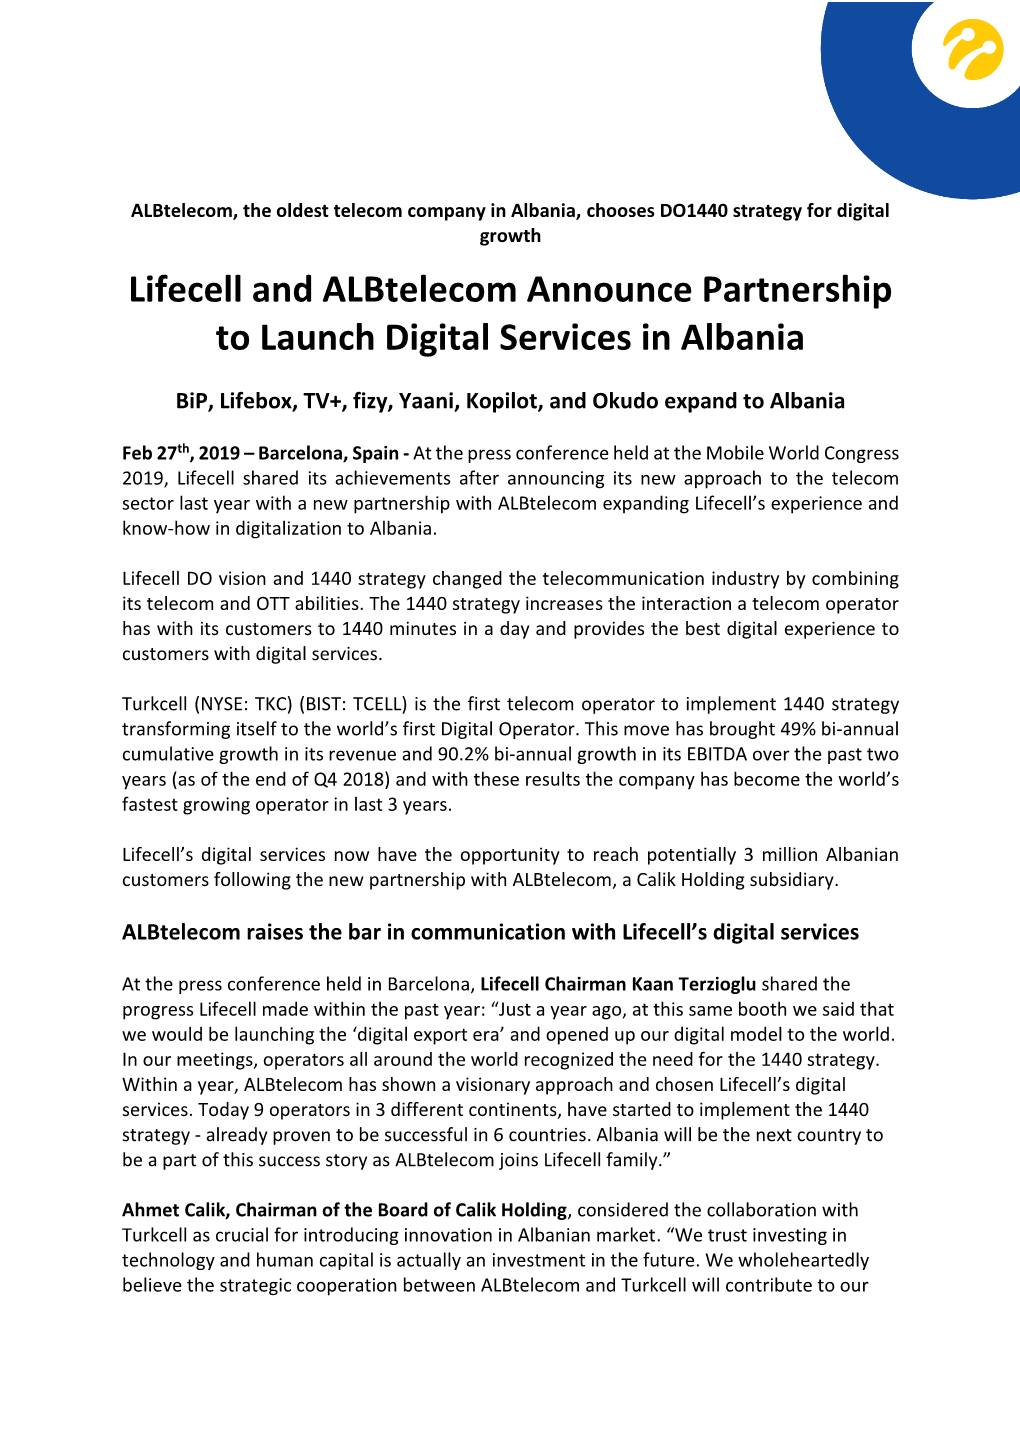 Lifecell and Albtelecom Announce Partnership to Launch Digital Services in Albania